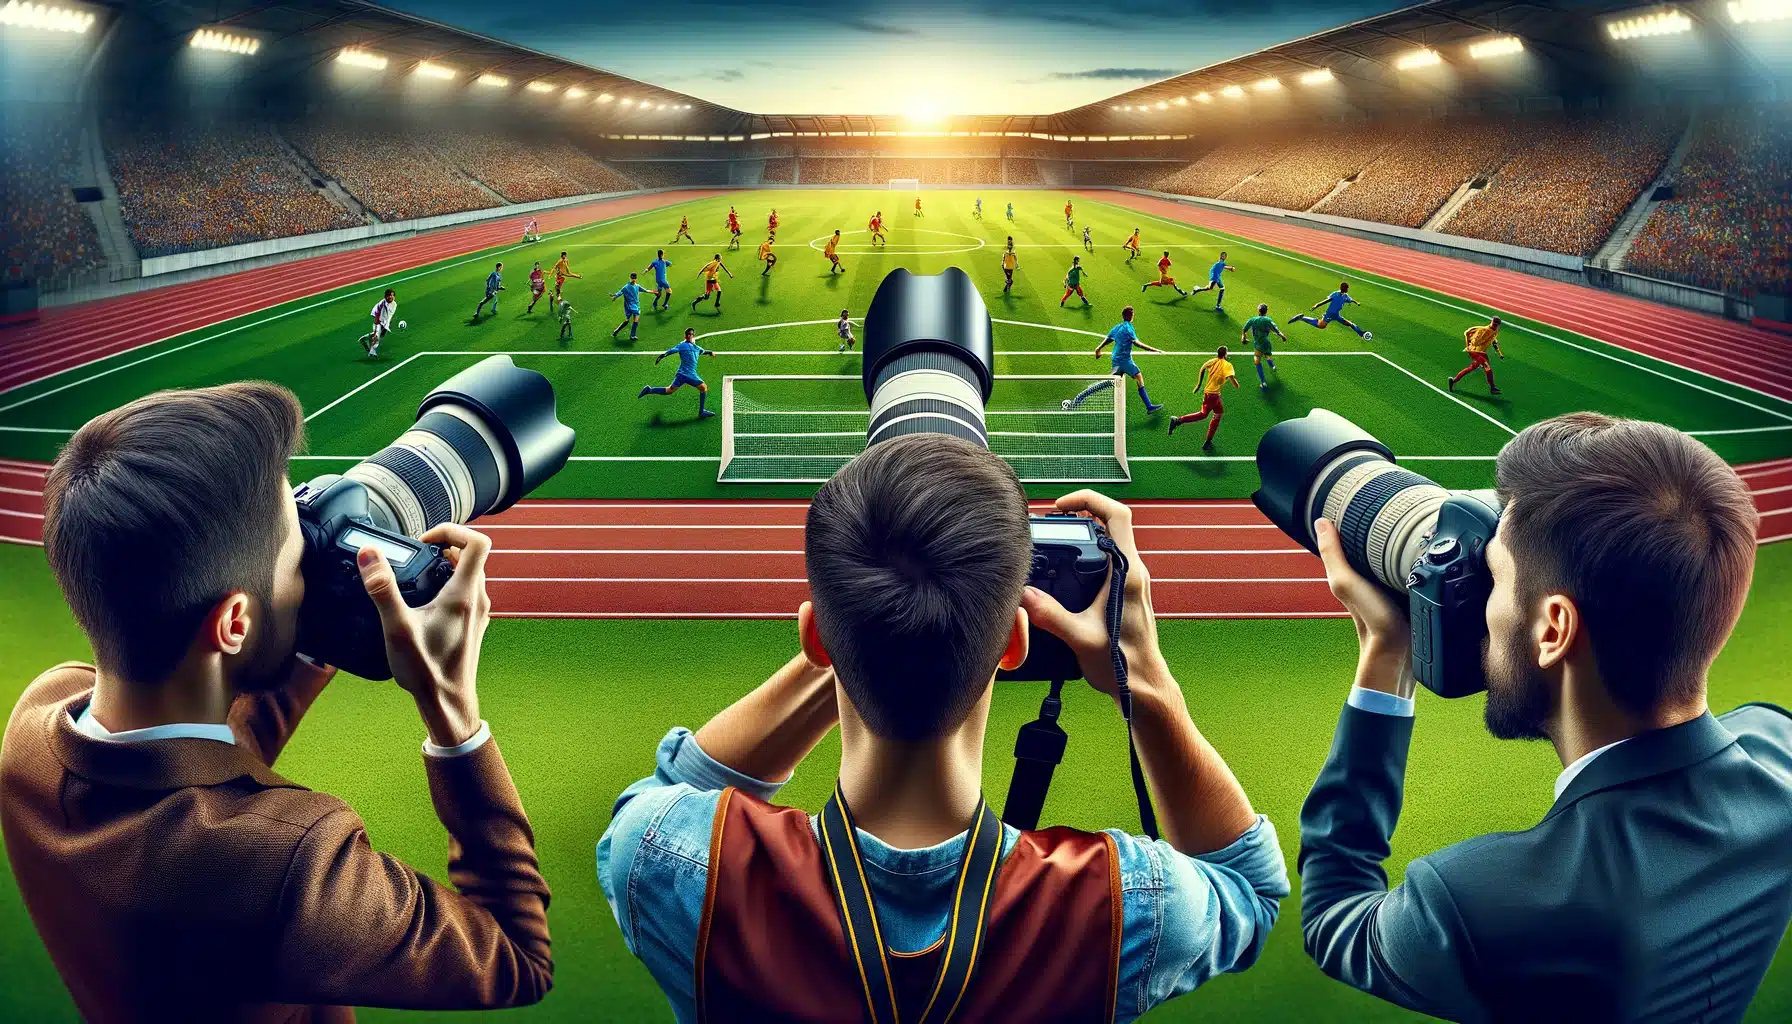 Three photographers at a sports event, utilizing different angles and lenses, exemplify sports photography and sports photography tips.